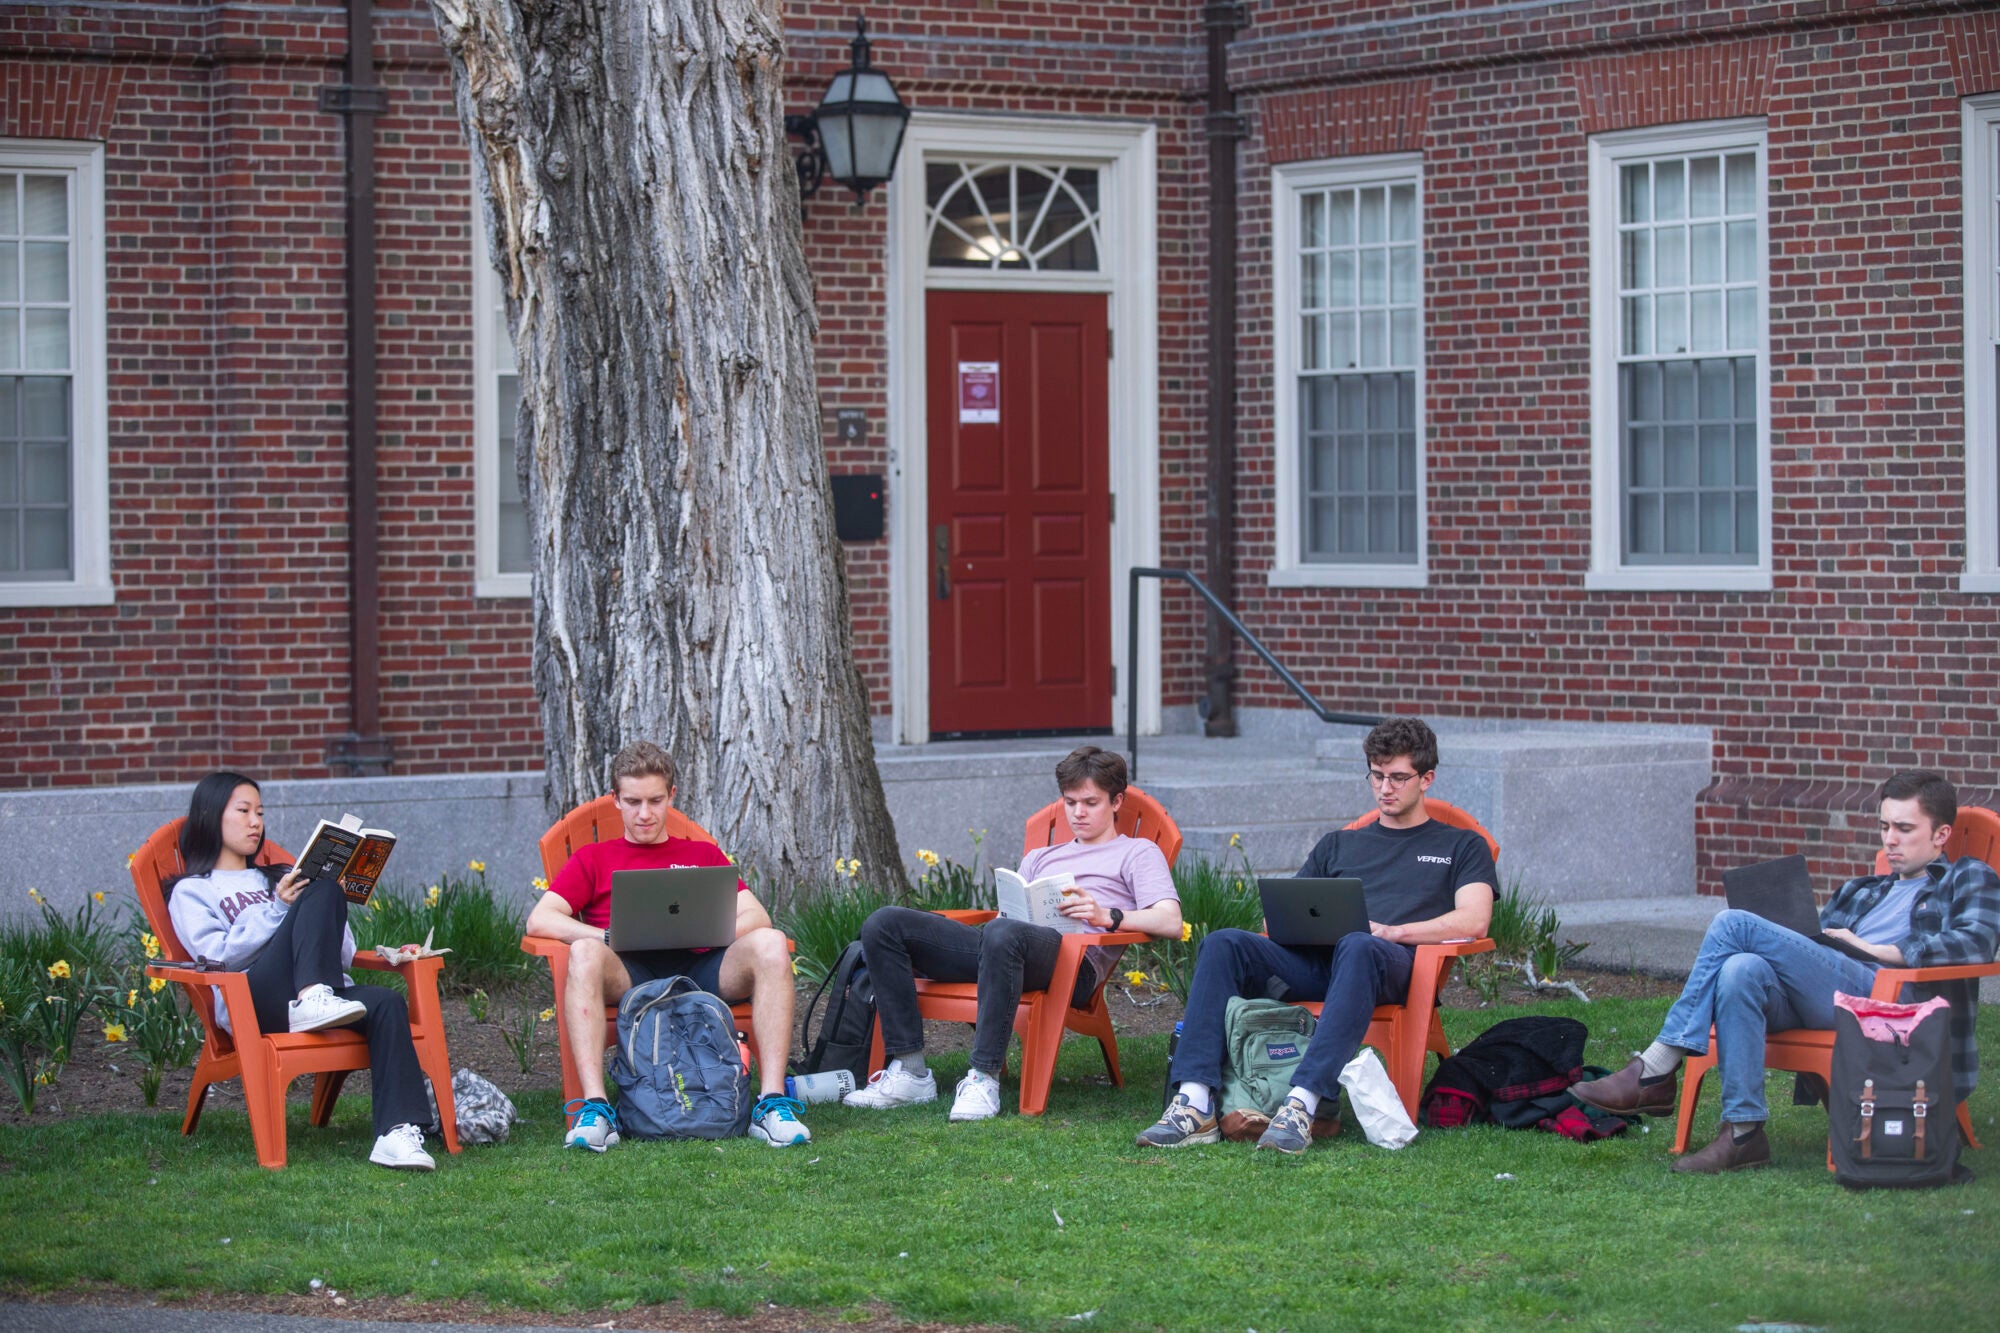 A group of students sitting in Adirondack chairs reading and studying